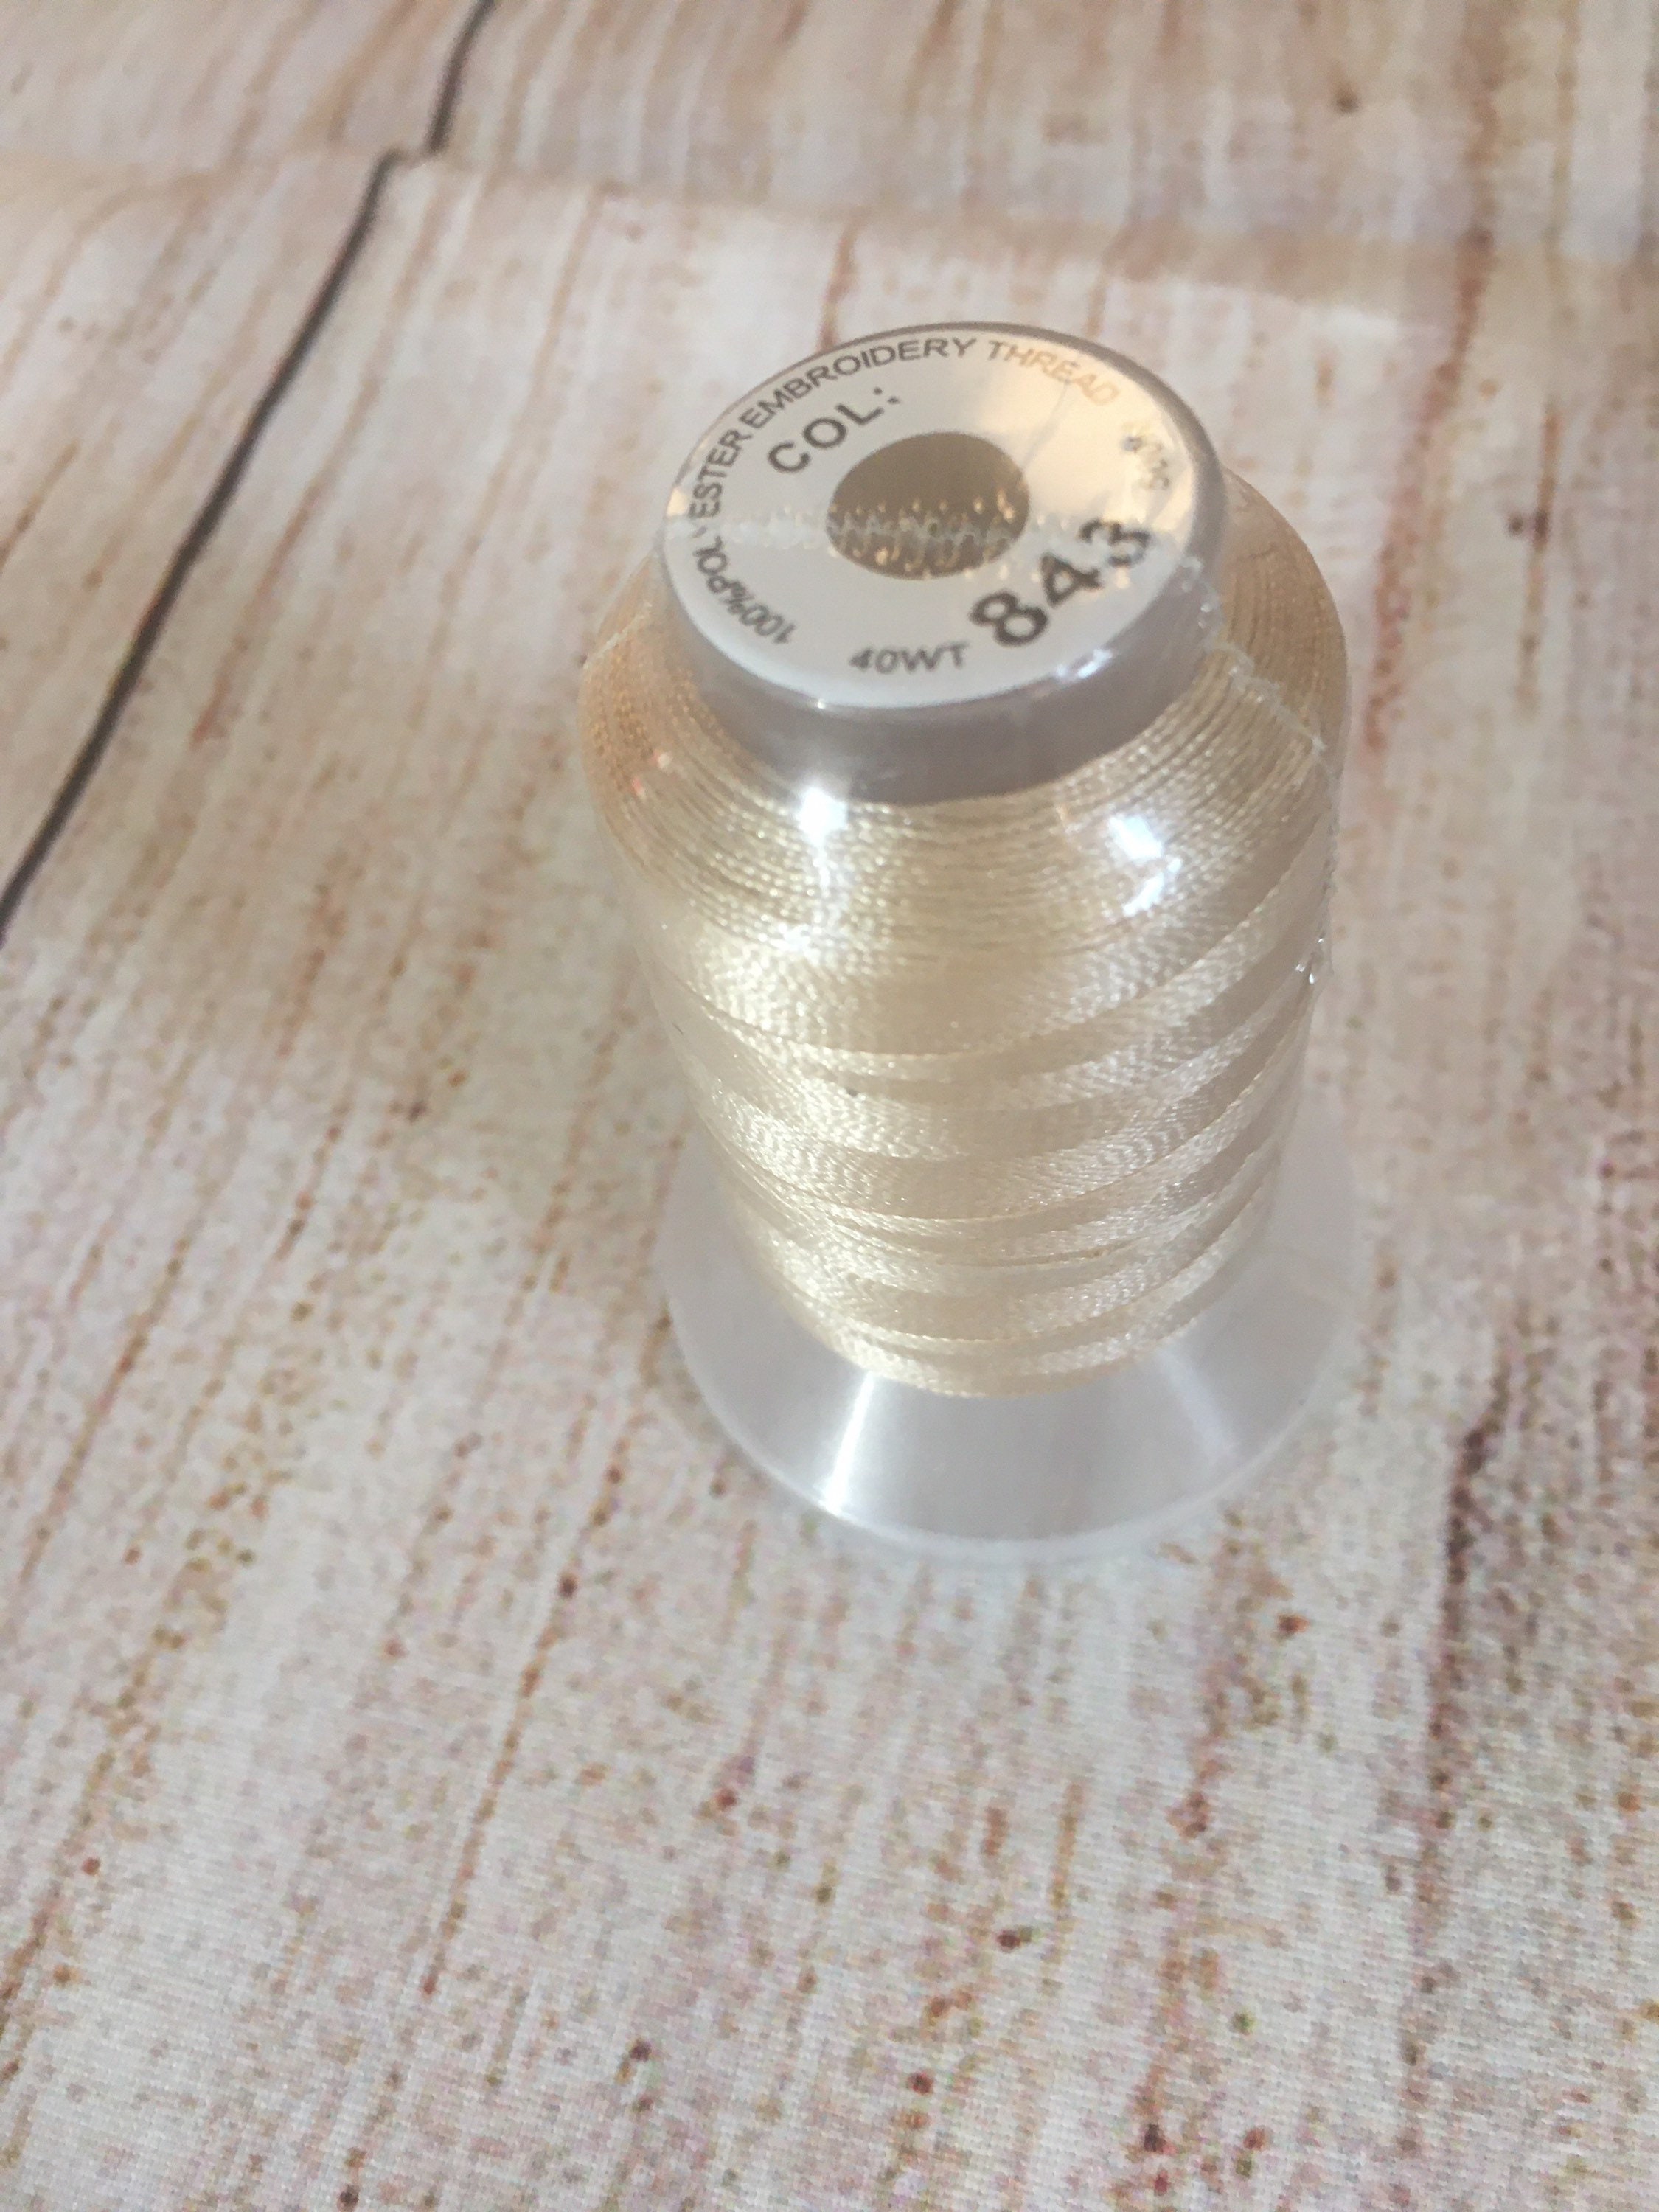 New Brothread 100% Polyester Embroidery Machine Thread, 40 WT, 500M, Color  843, Other Colors Available, Brother Embroidery Thread, Beige 